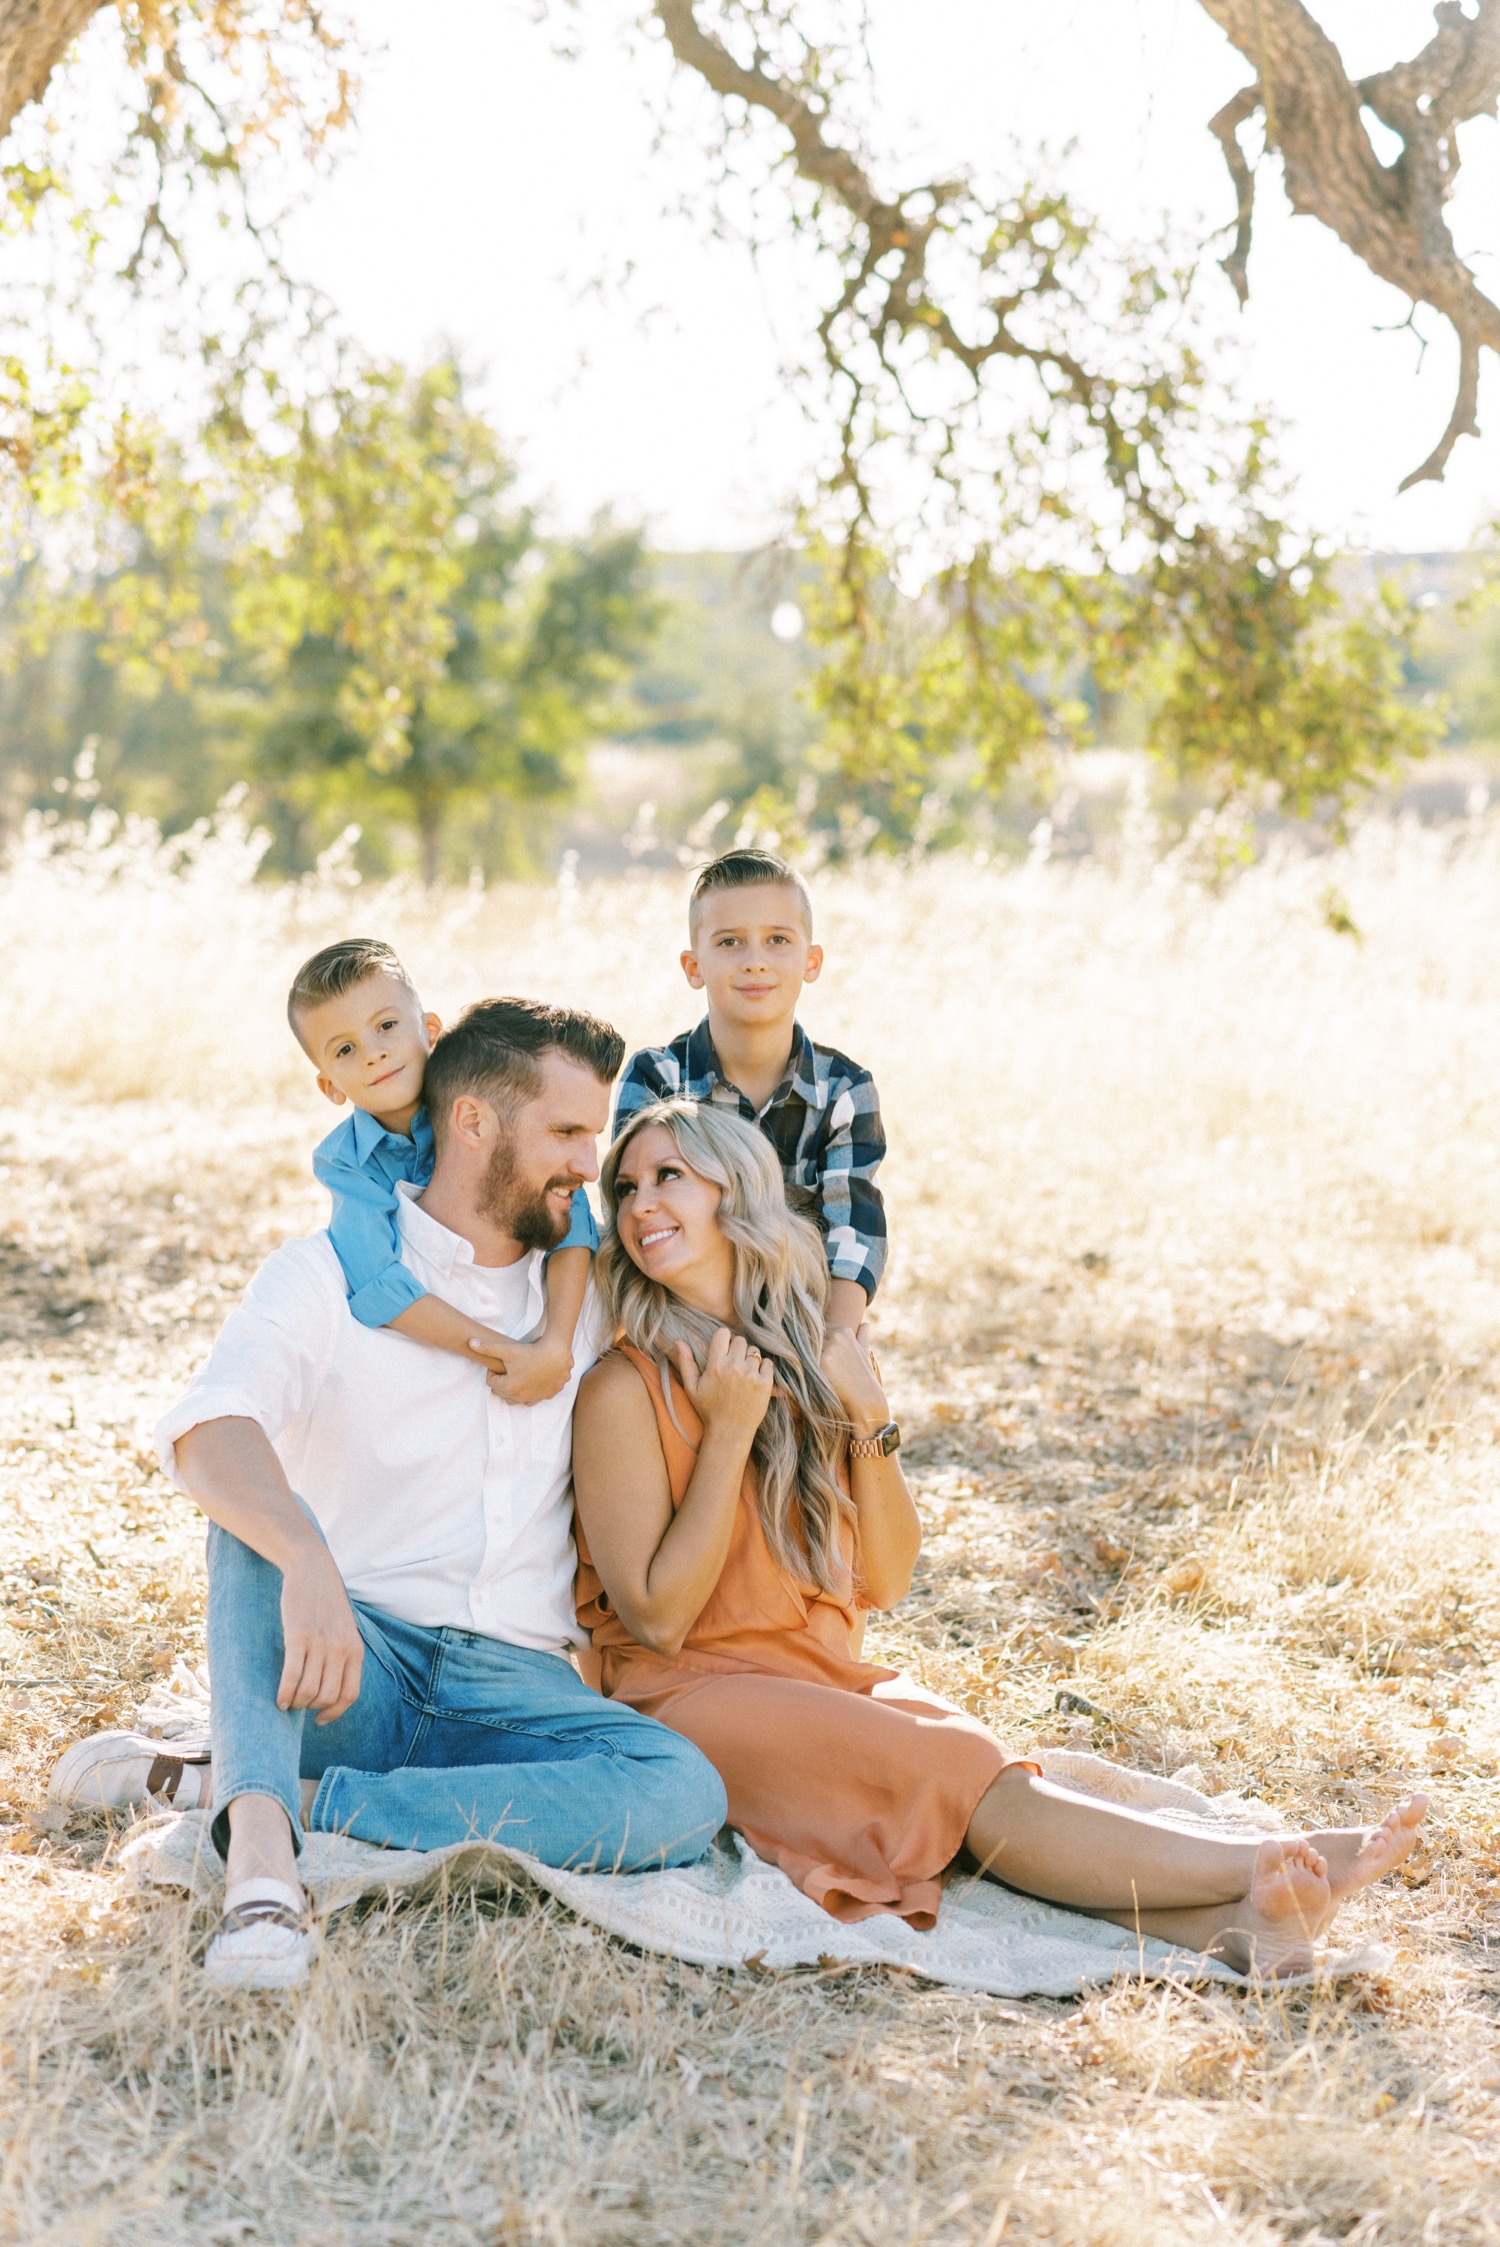 Family Pictures with Teenagers - Orange County Family Photographer | Family  Pictures Southern California